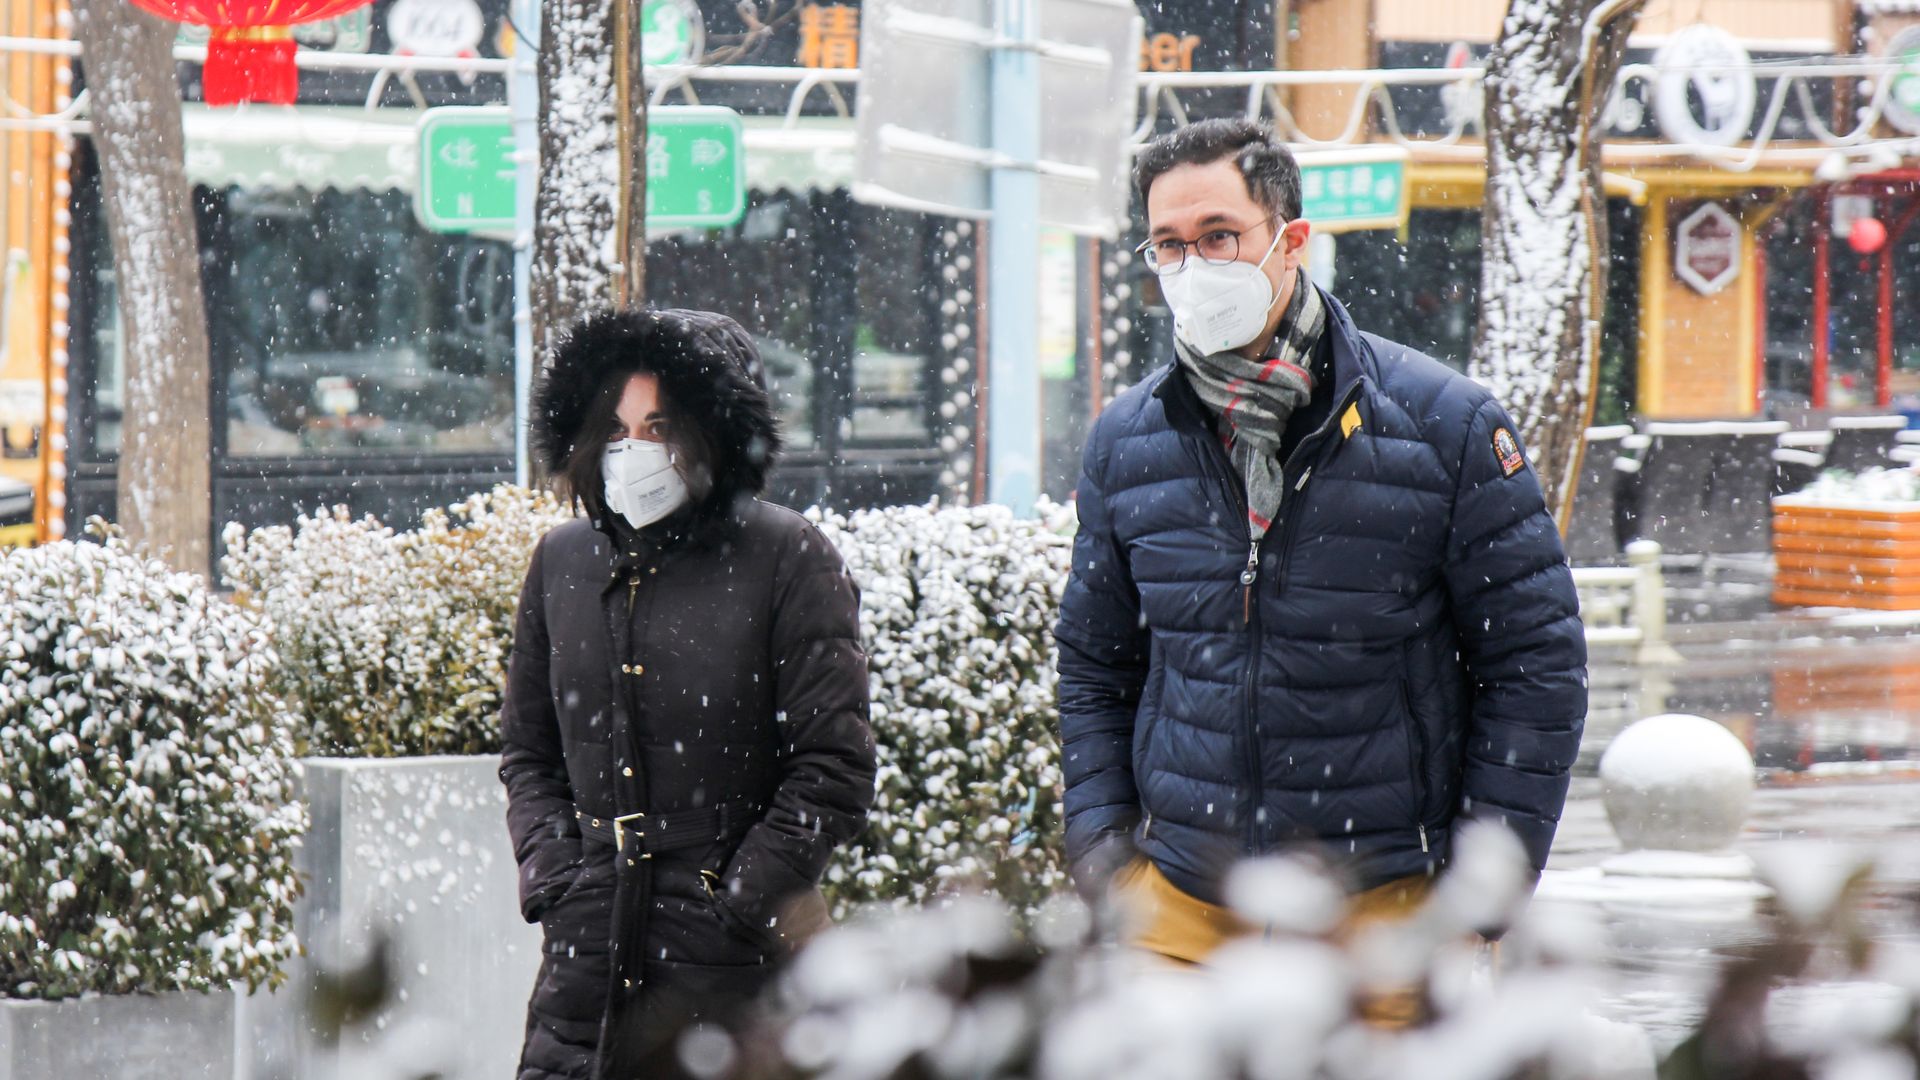 In this image, two people wear face masks while walking down the street in Beijing. 